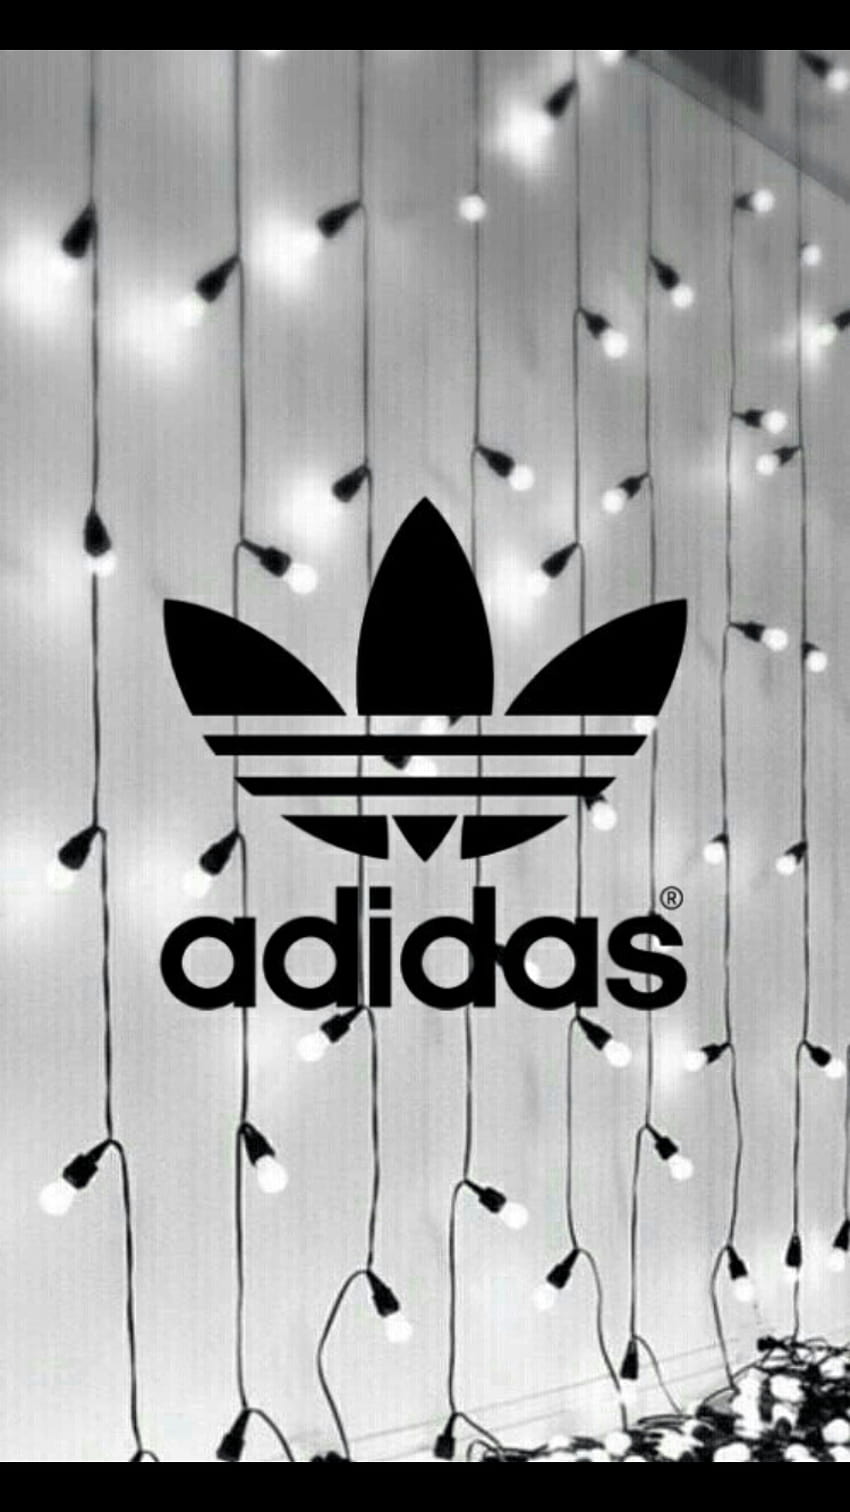 Adidas wallpaper for iPhone and Android! iPhone Android - Adidas